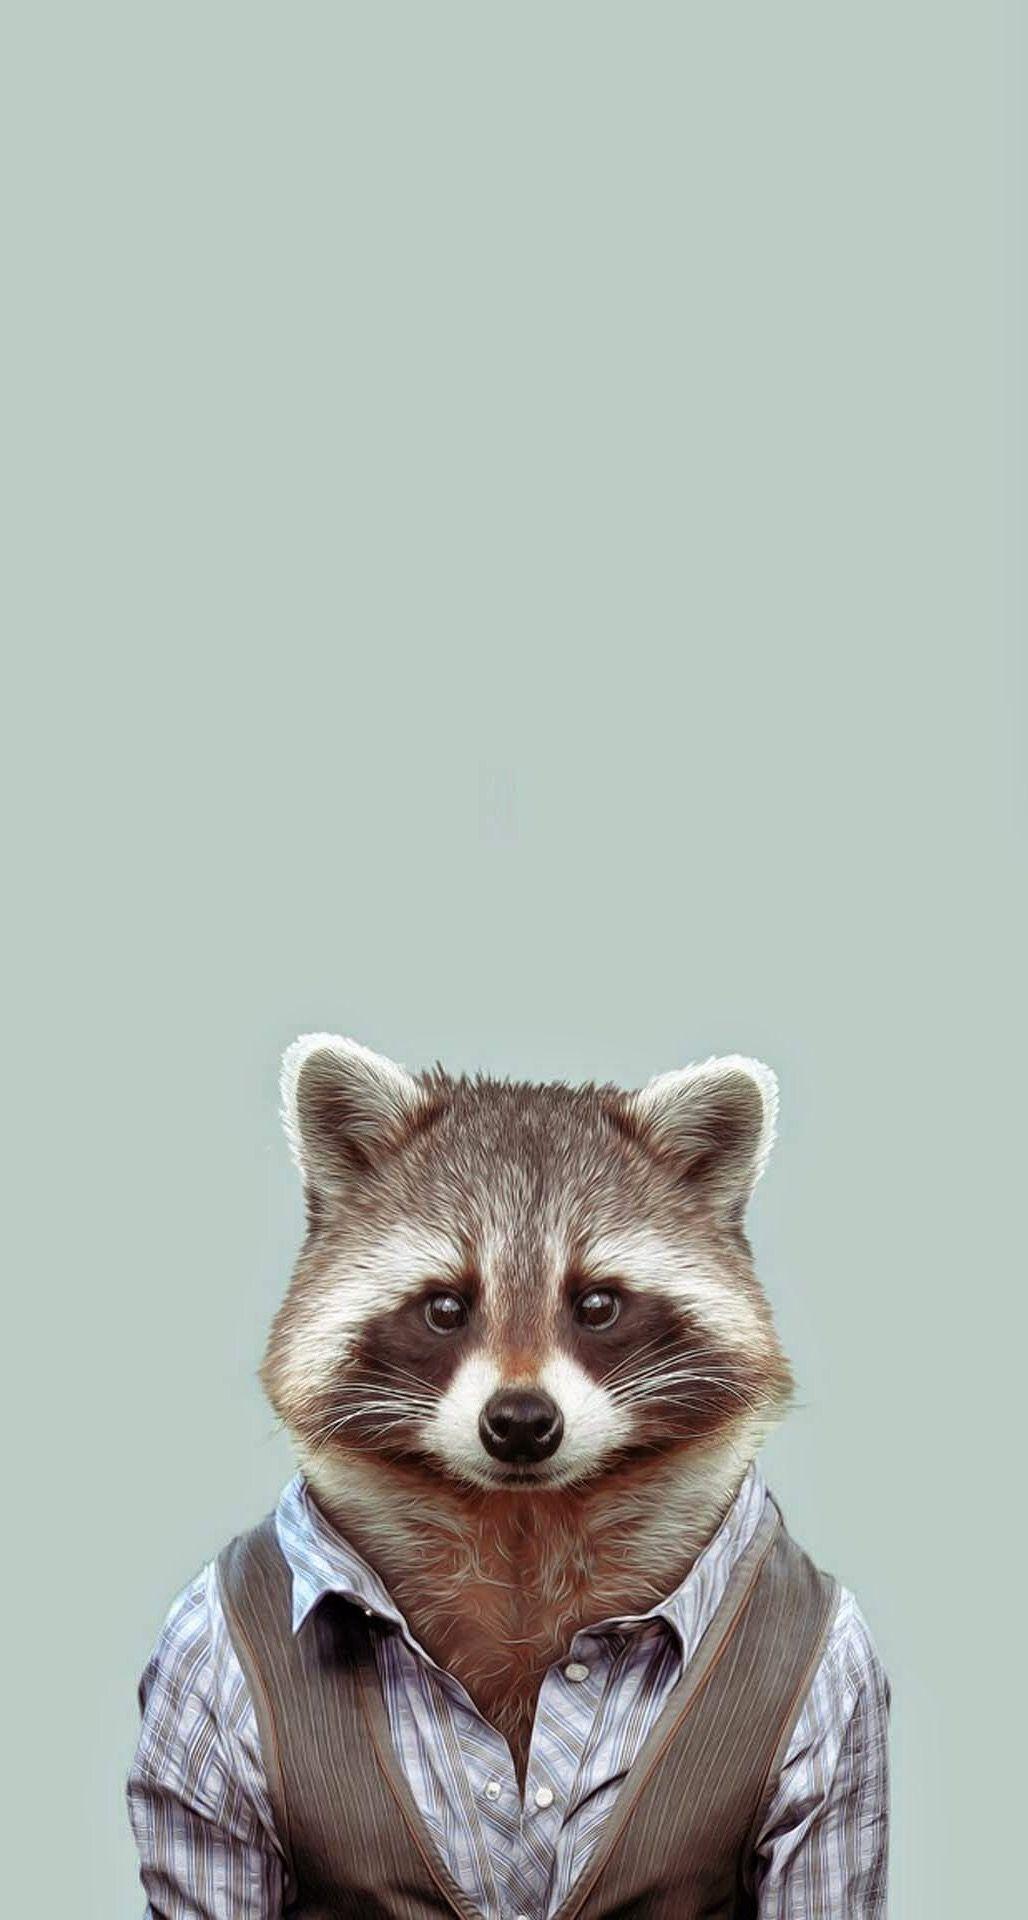 Raccoon Wallpaper and Picture Collection